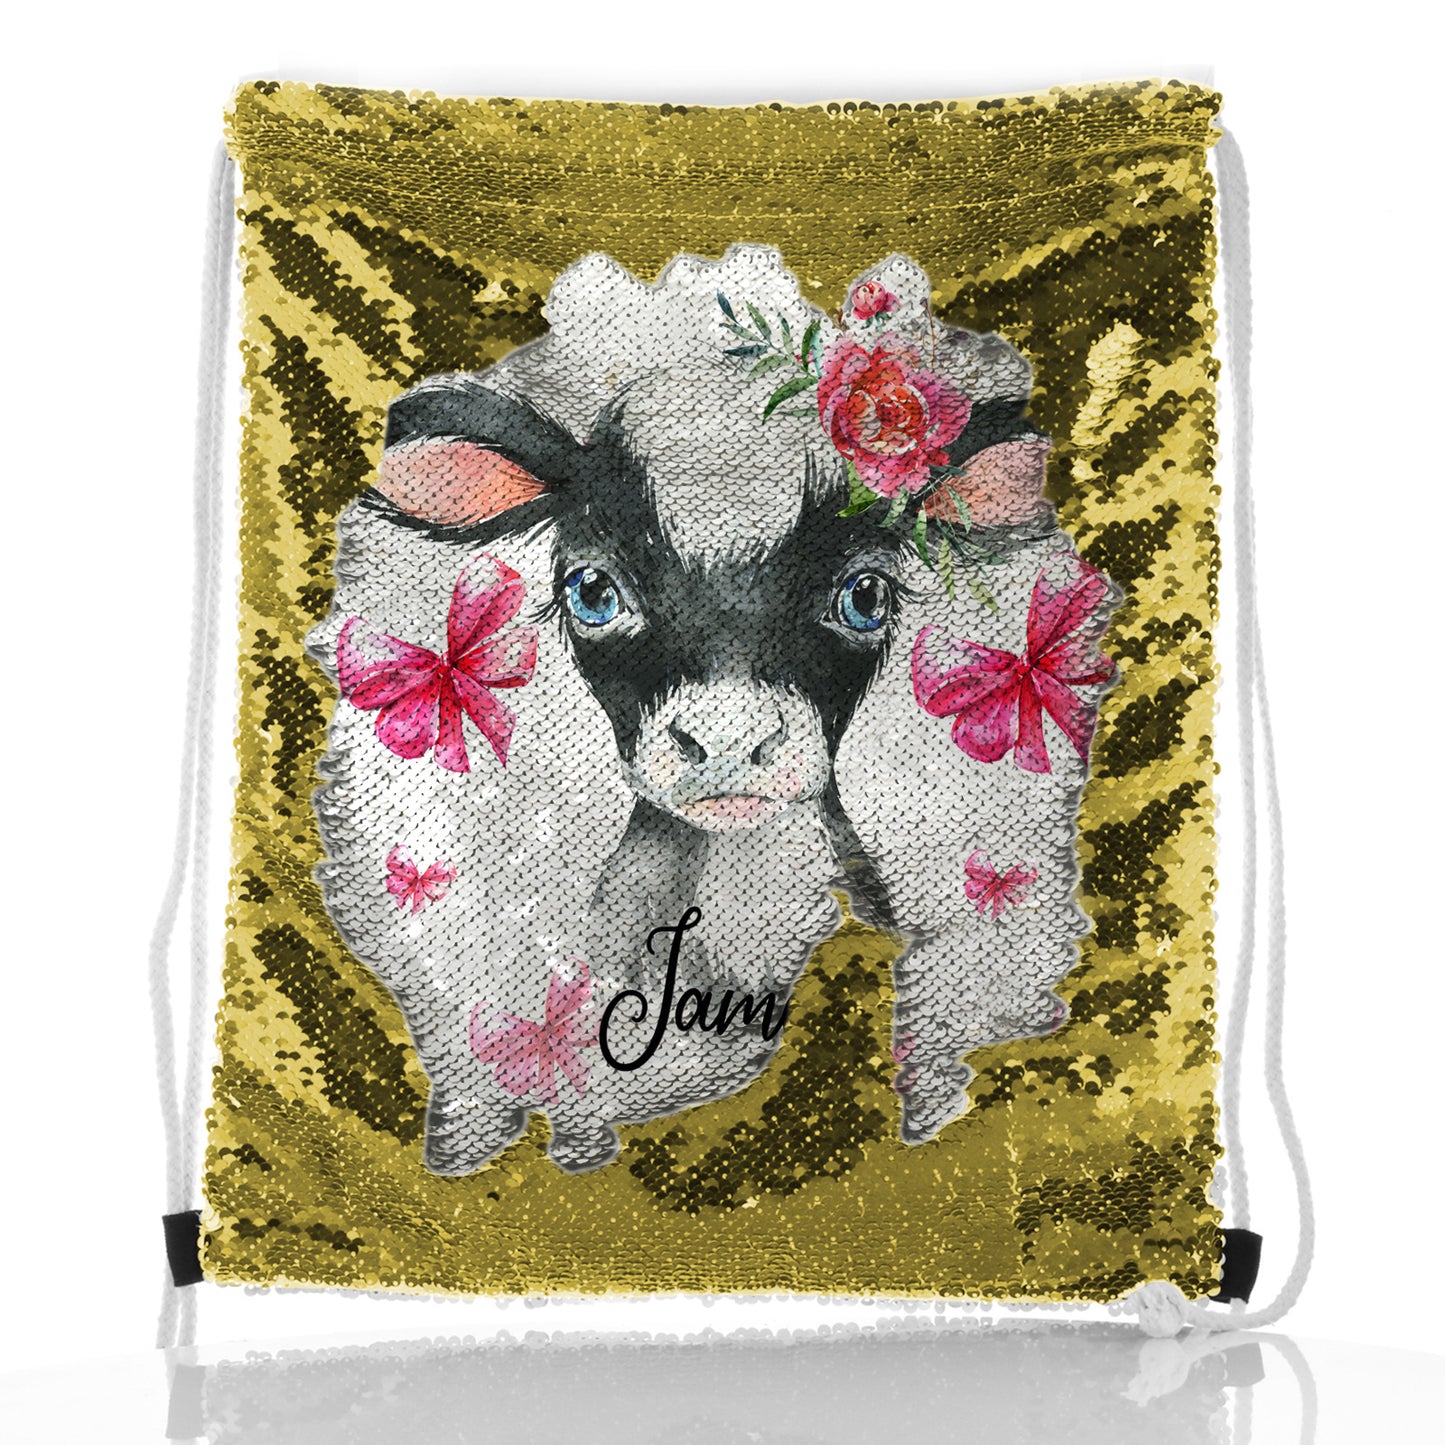 Personalised Sequin Drawstring Backpack with Cow Pink Bows and Cute Text